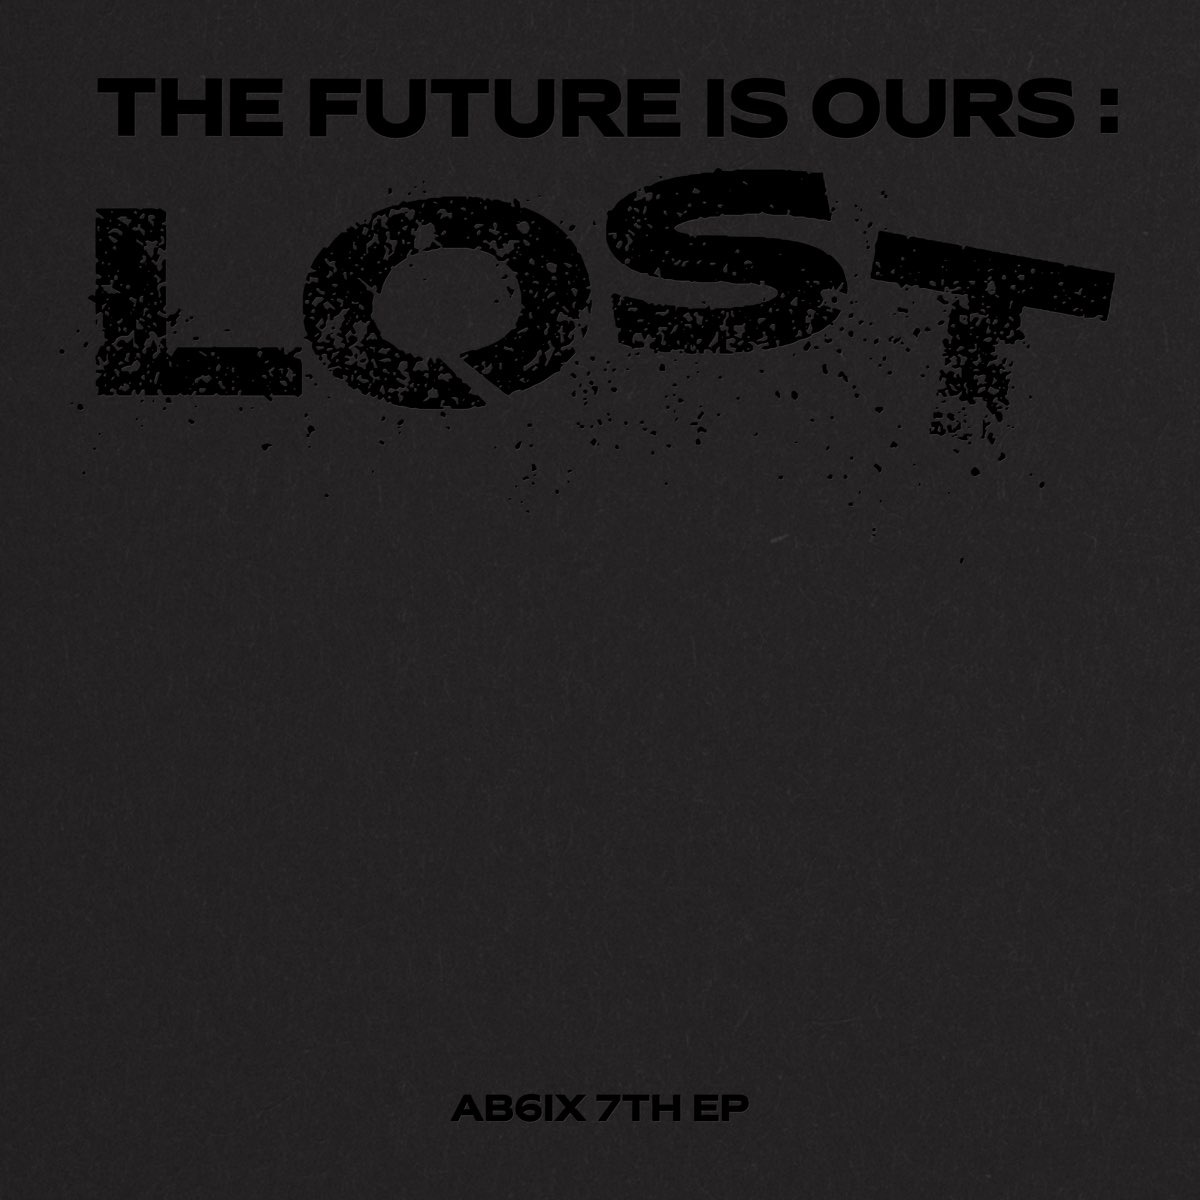 AB6IX The Future is Ours: Lost cover artwork